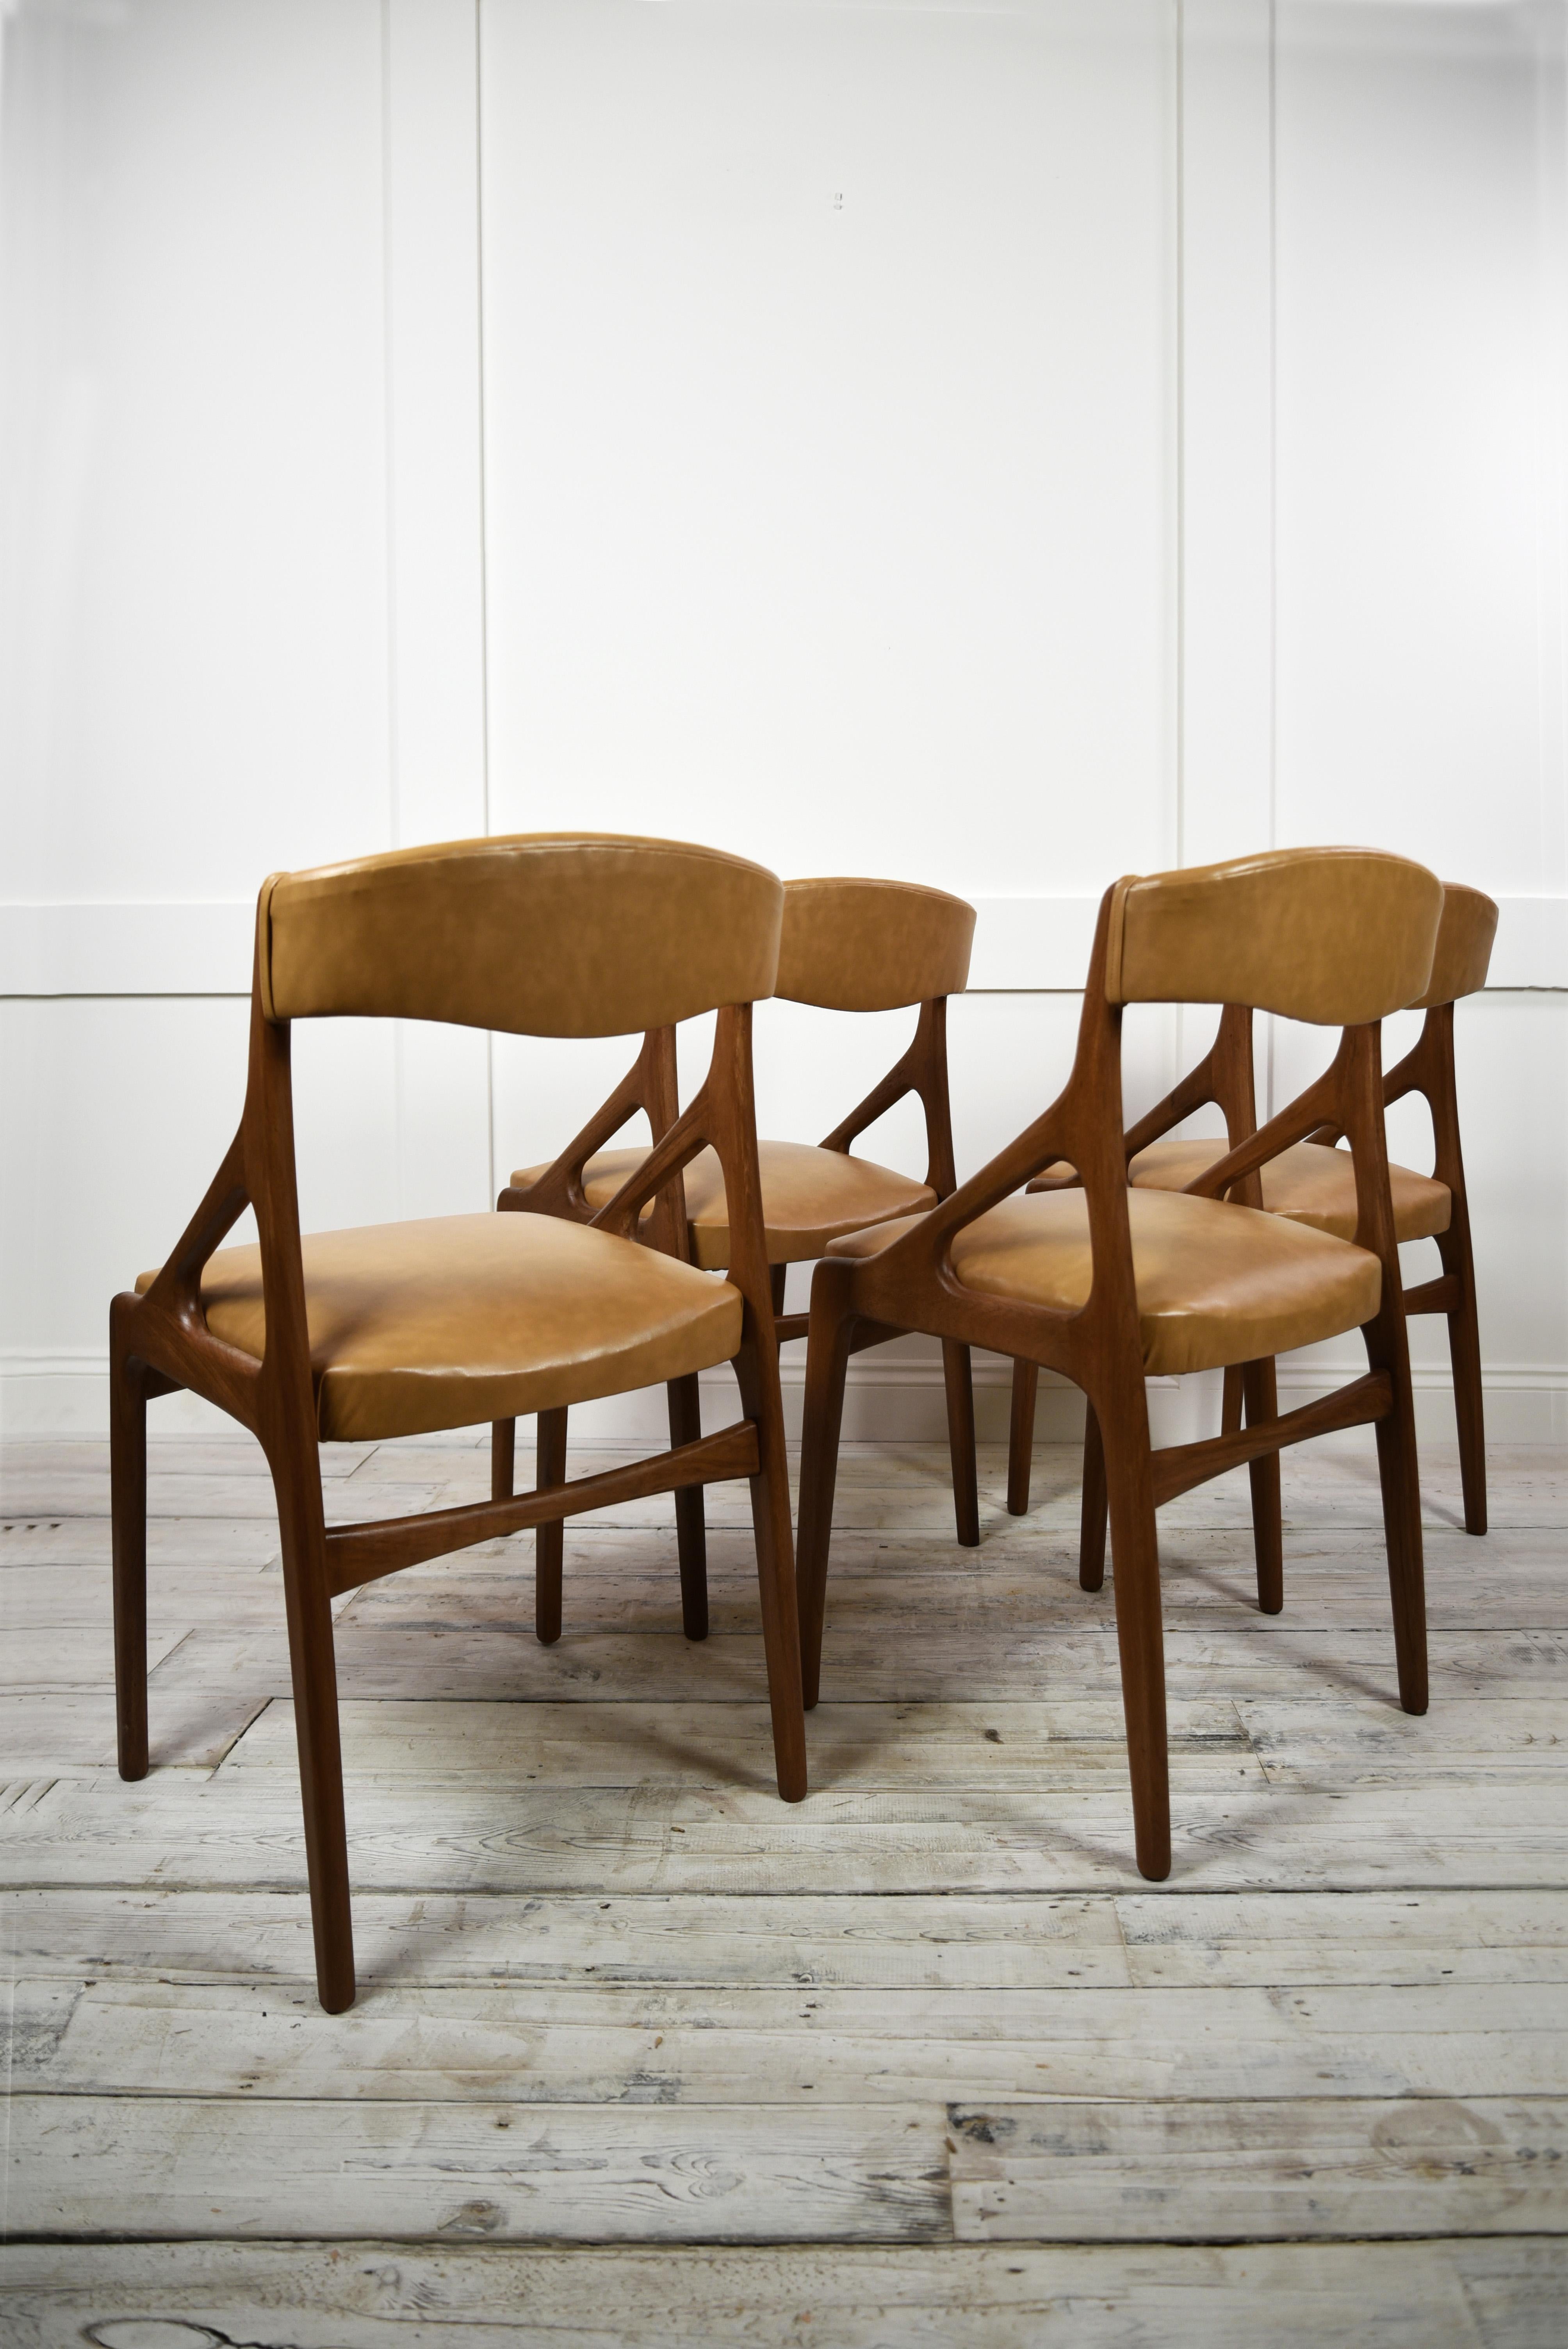 Set of Four Midcentury Modern Teak and Leatherette Dining Chairs c.1960's For Sale 2